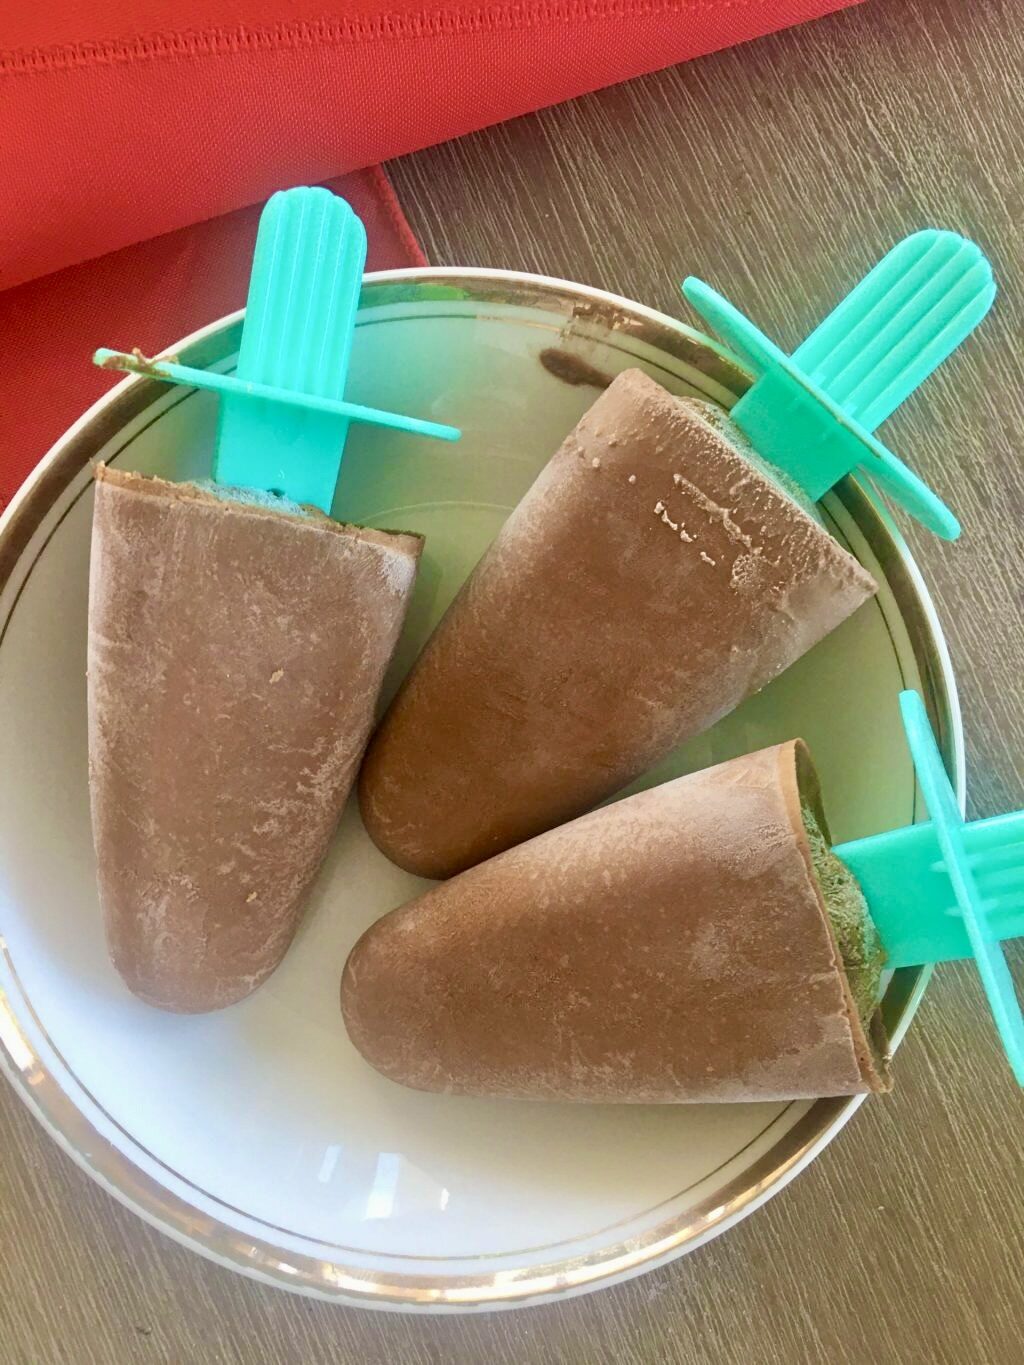 3 choc banana popsicles laying on a saucer